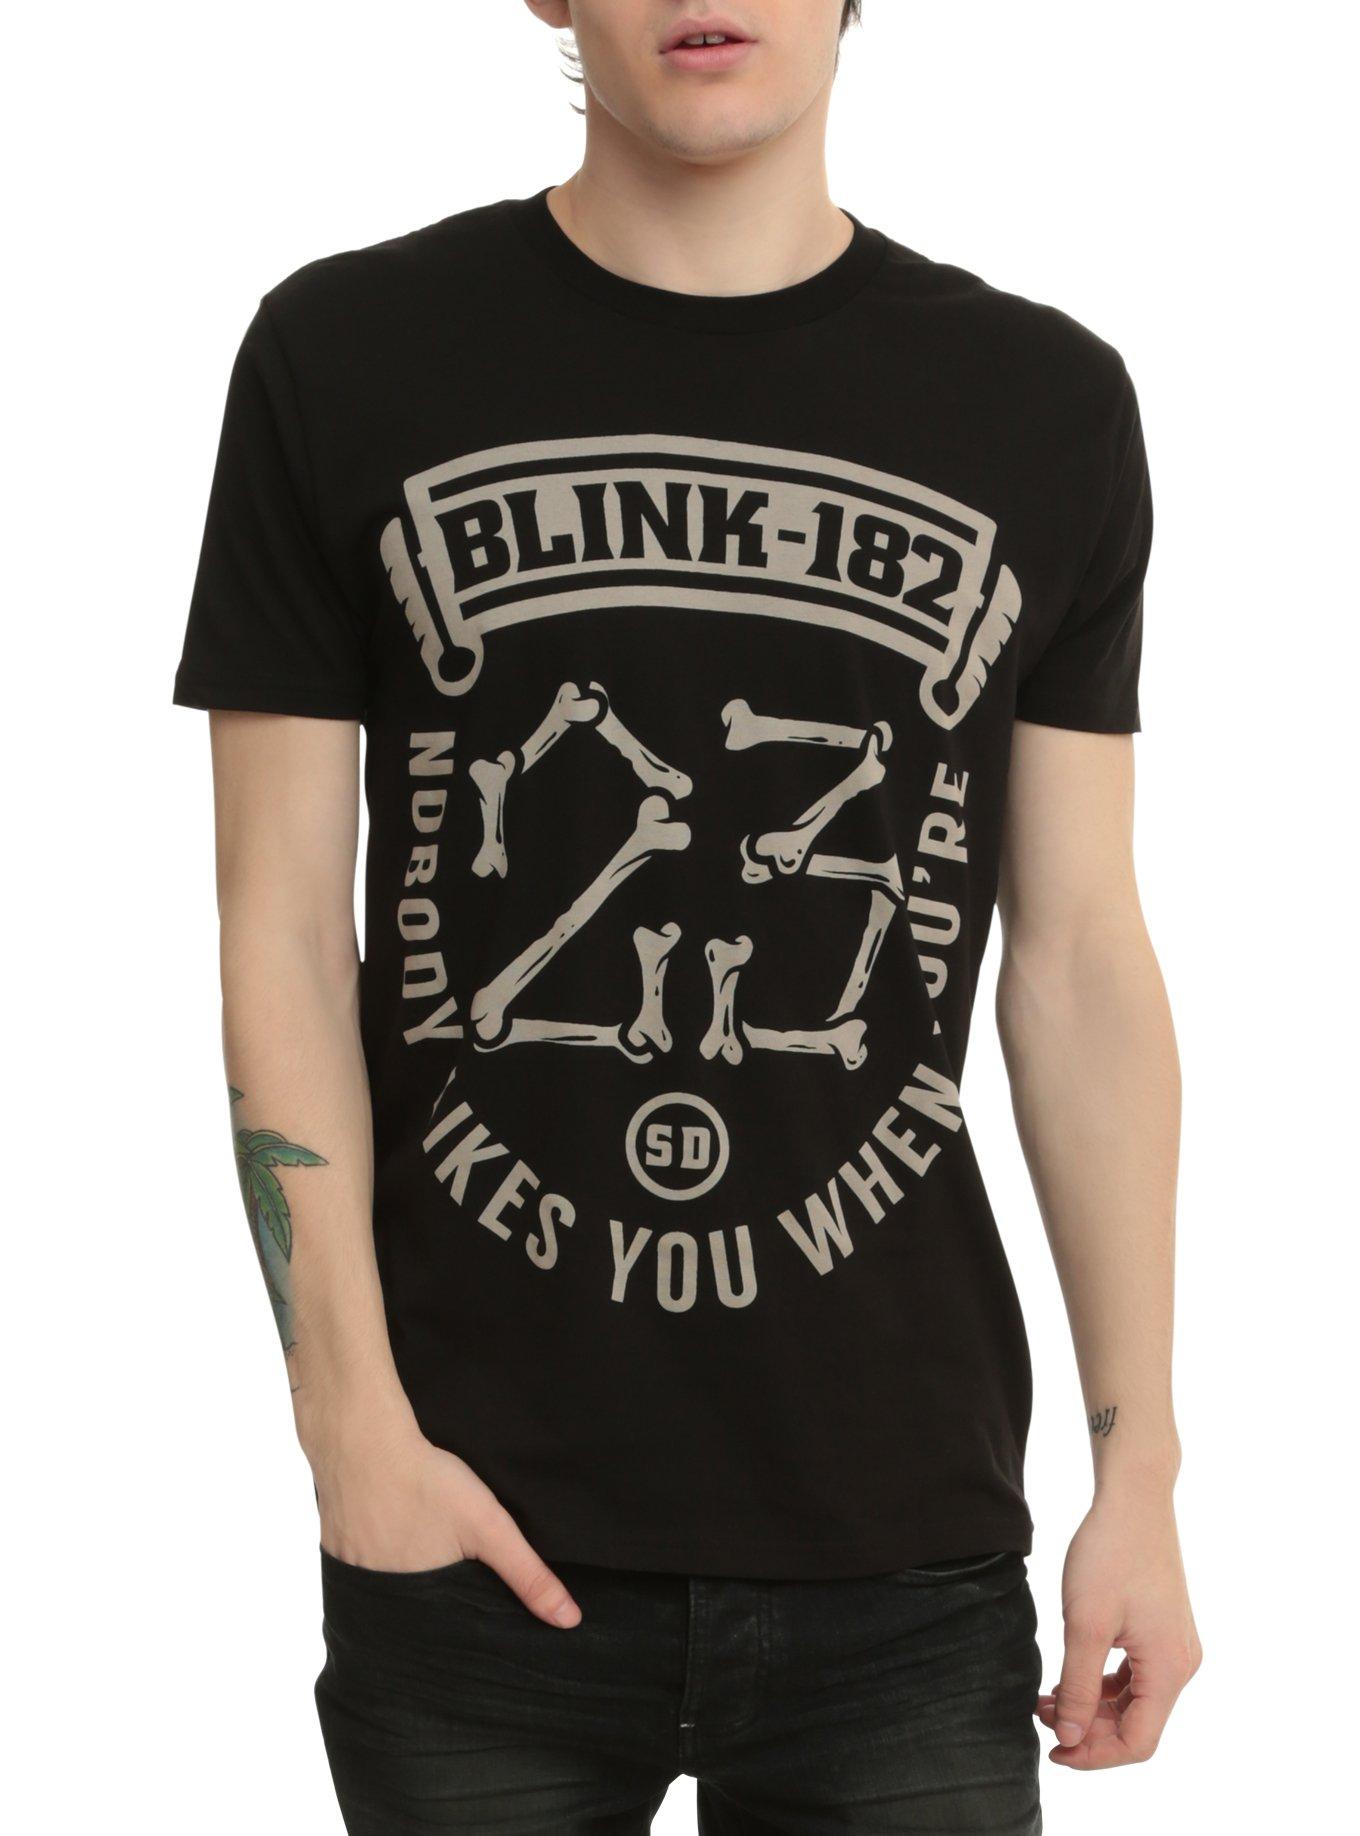 Blink-182 You're 23 T-Shirt | Hot Topic